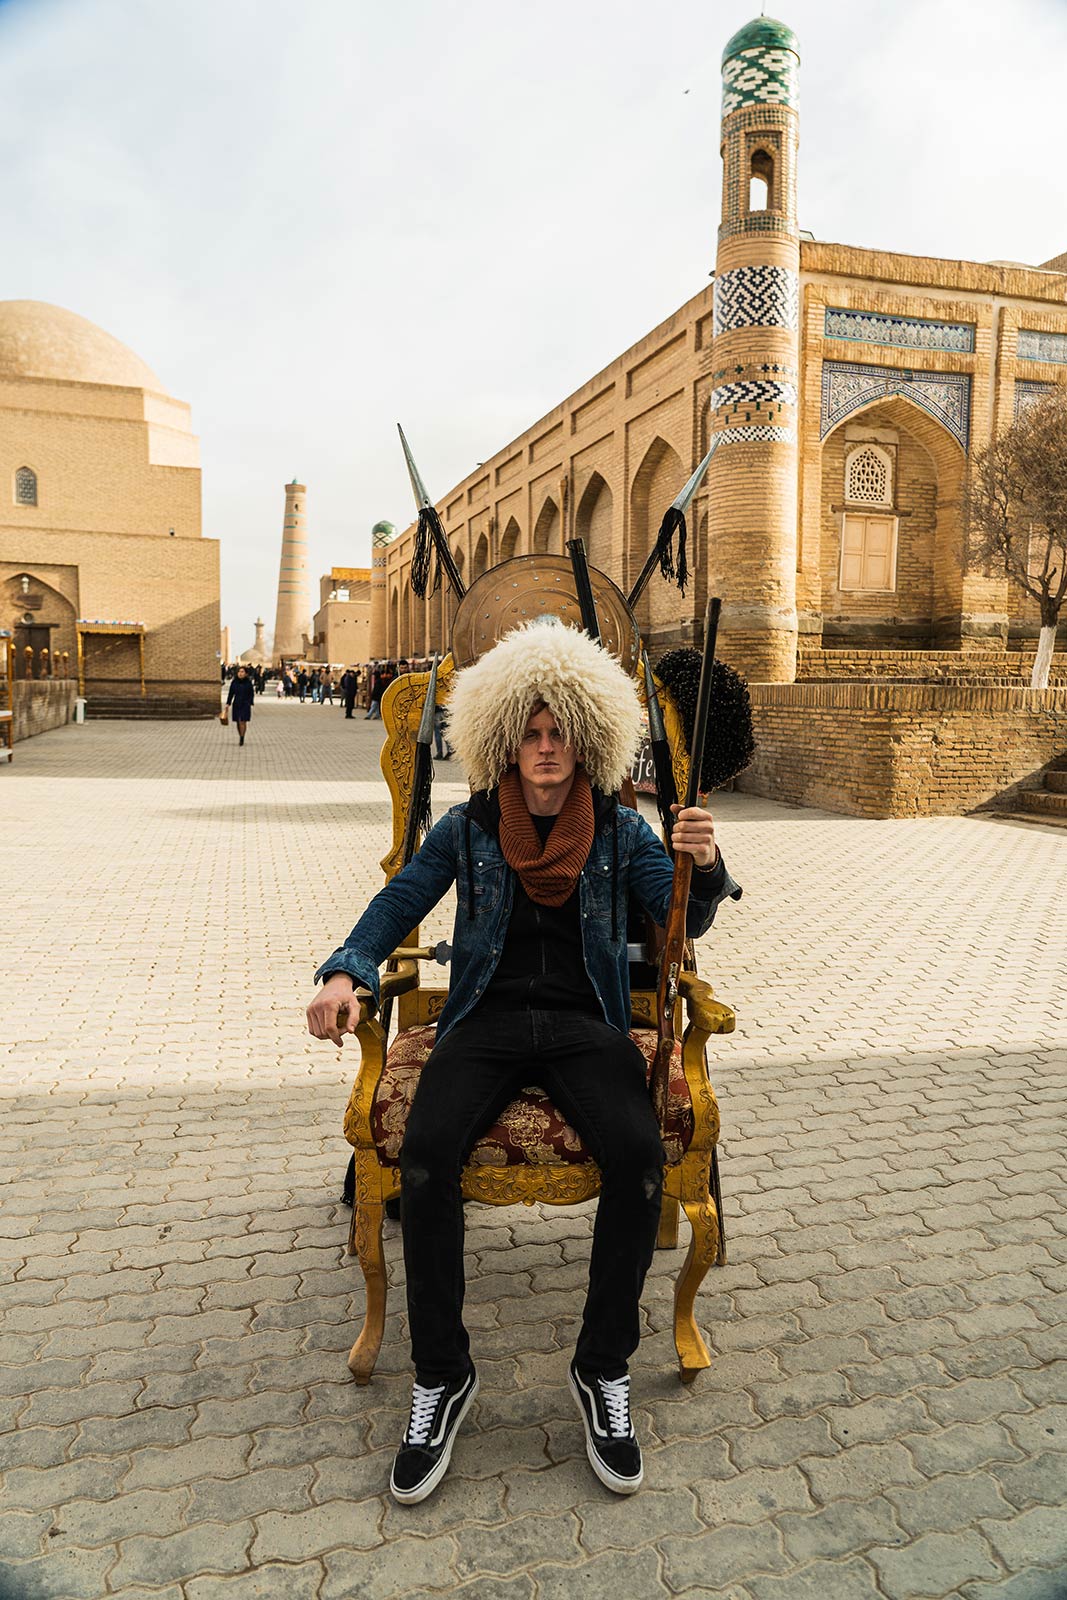 David Simpson wearing a fur hat and seated in the middle of the street in Khiva, Uzbekistan. Crossing in Uzbekistan and the train to Bukhara